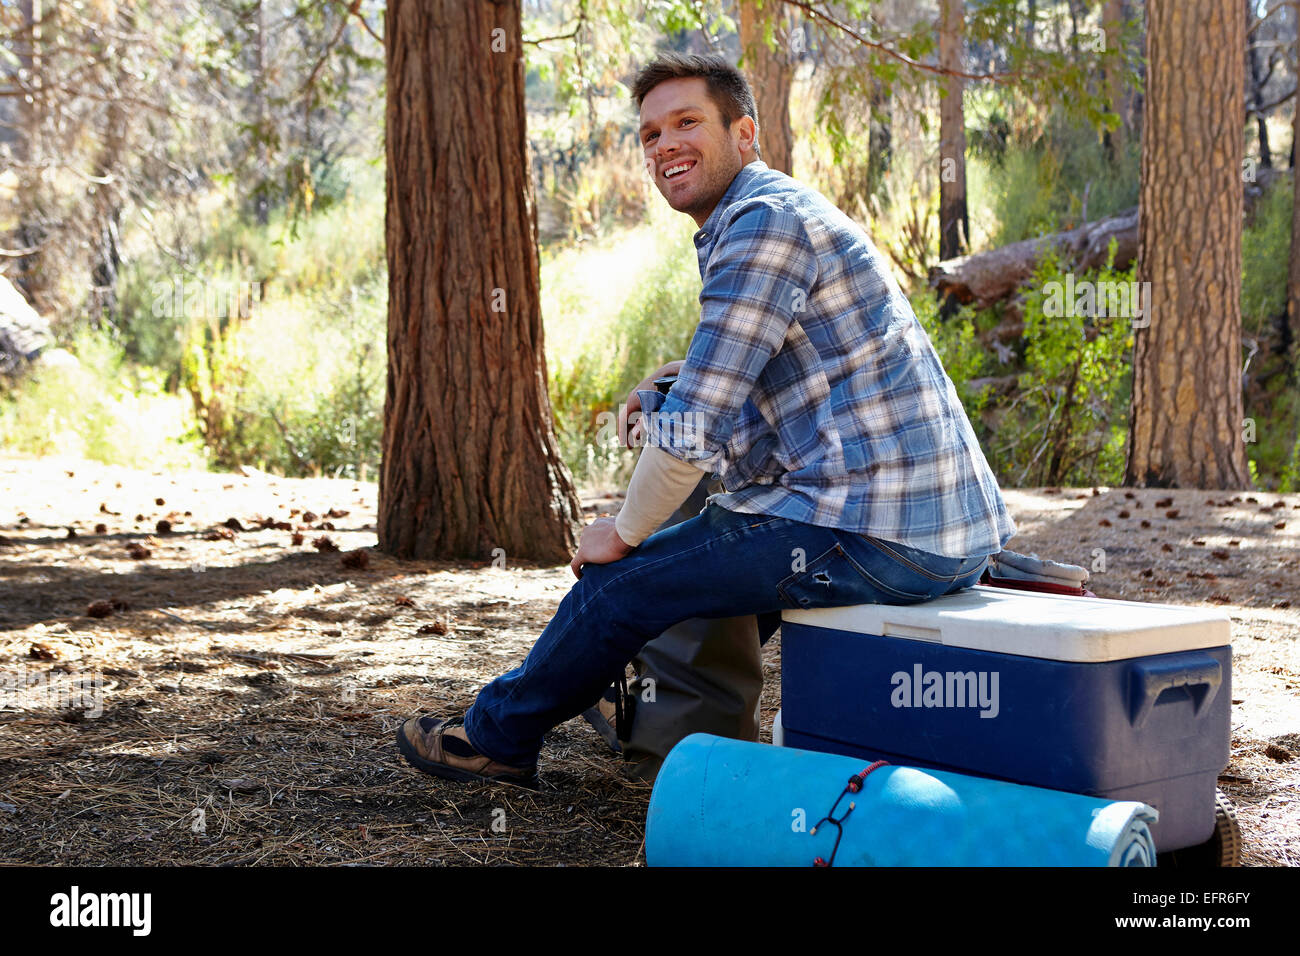 Young man in forest sitting on cool box, Los Angeles, California, USA Stock Photo